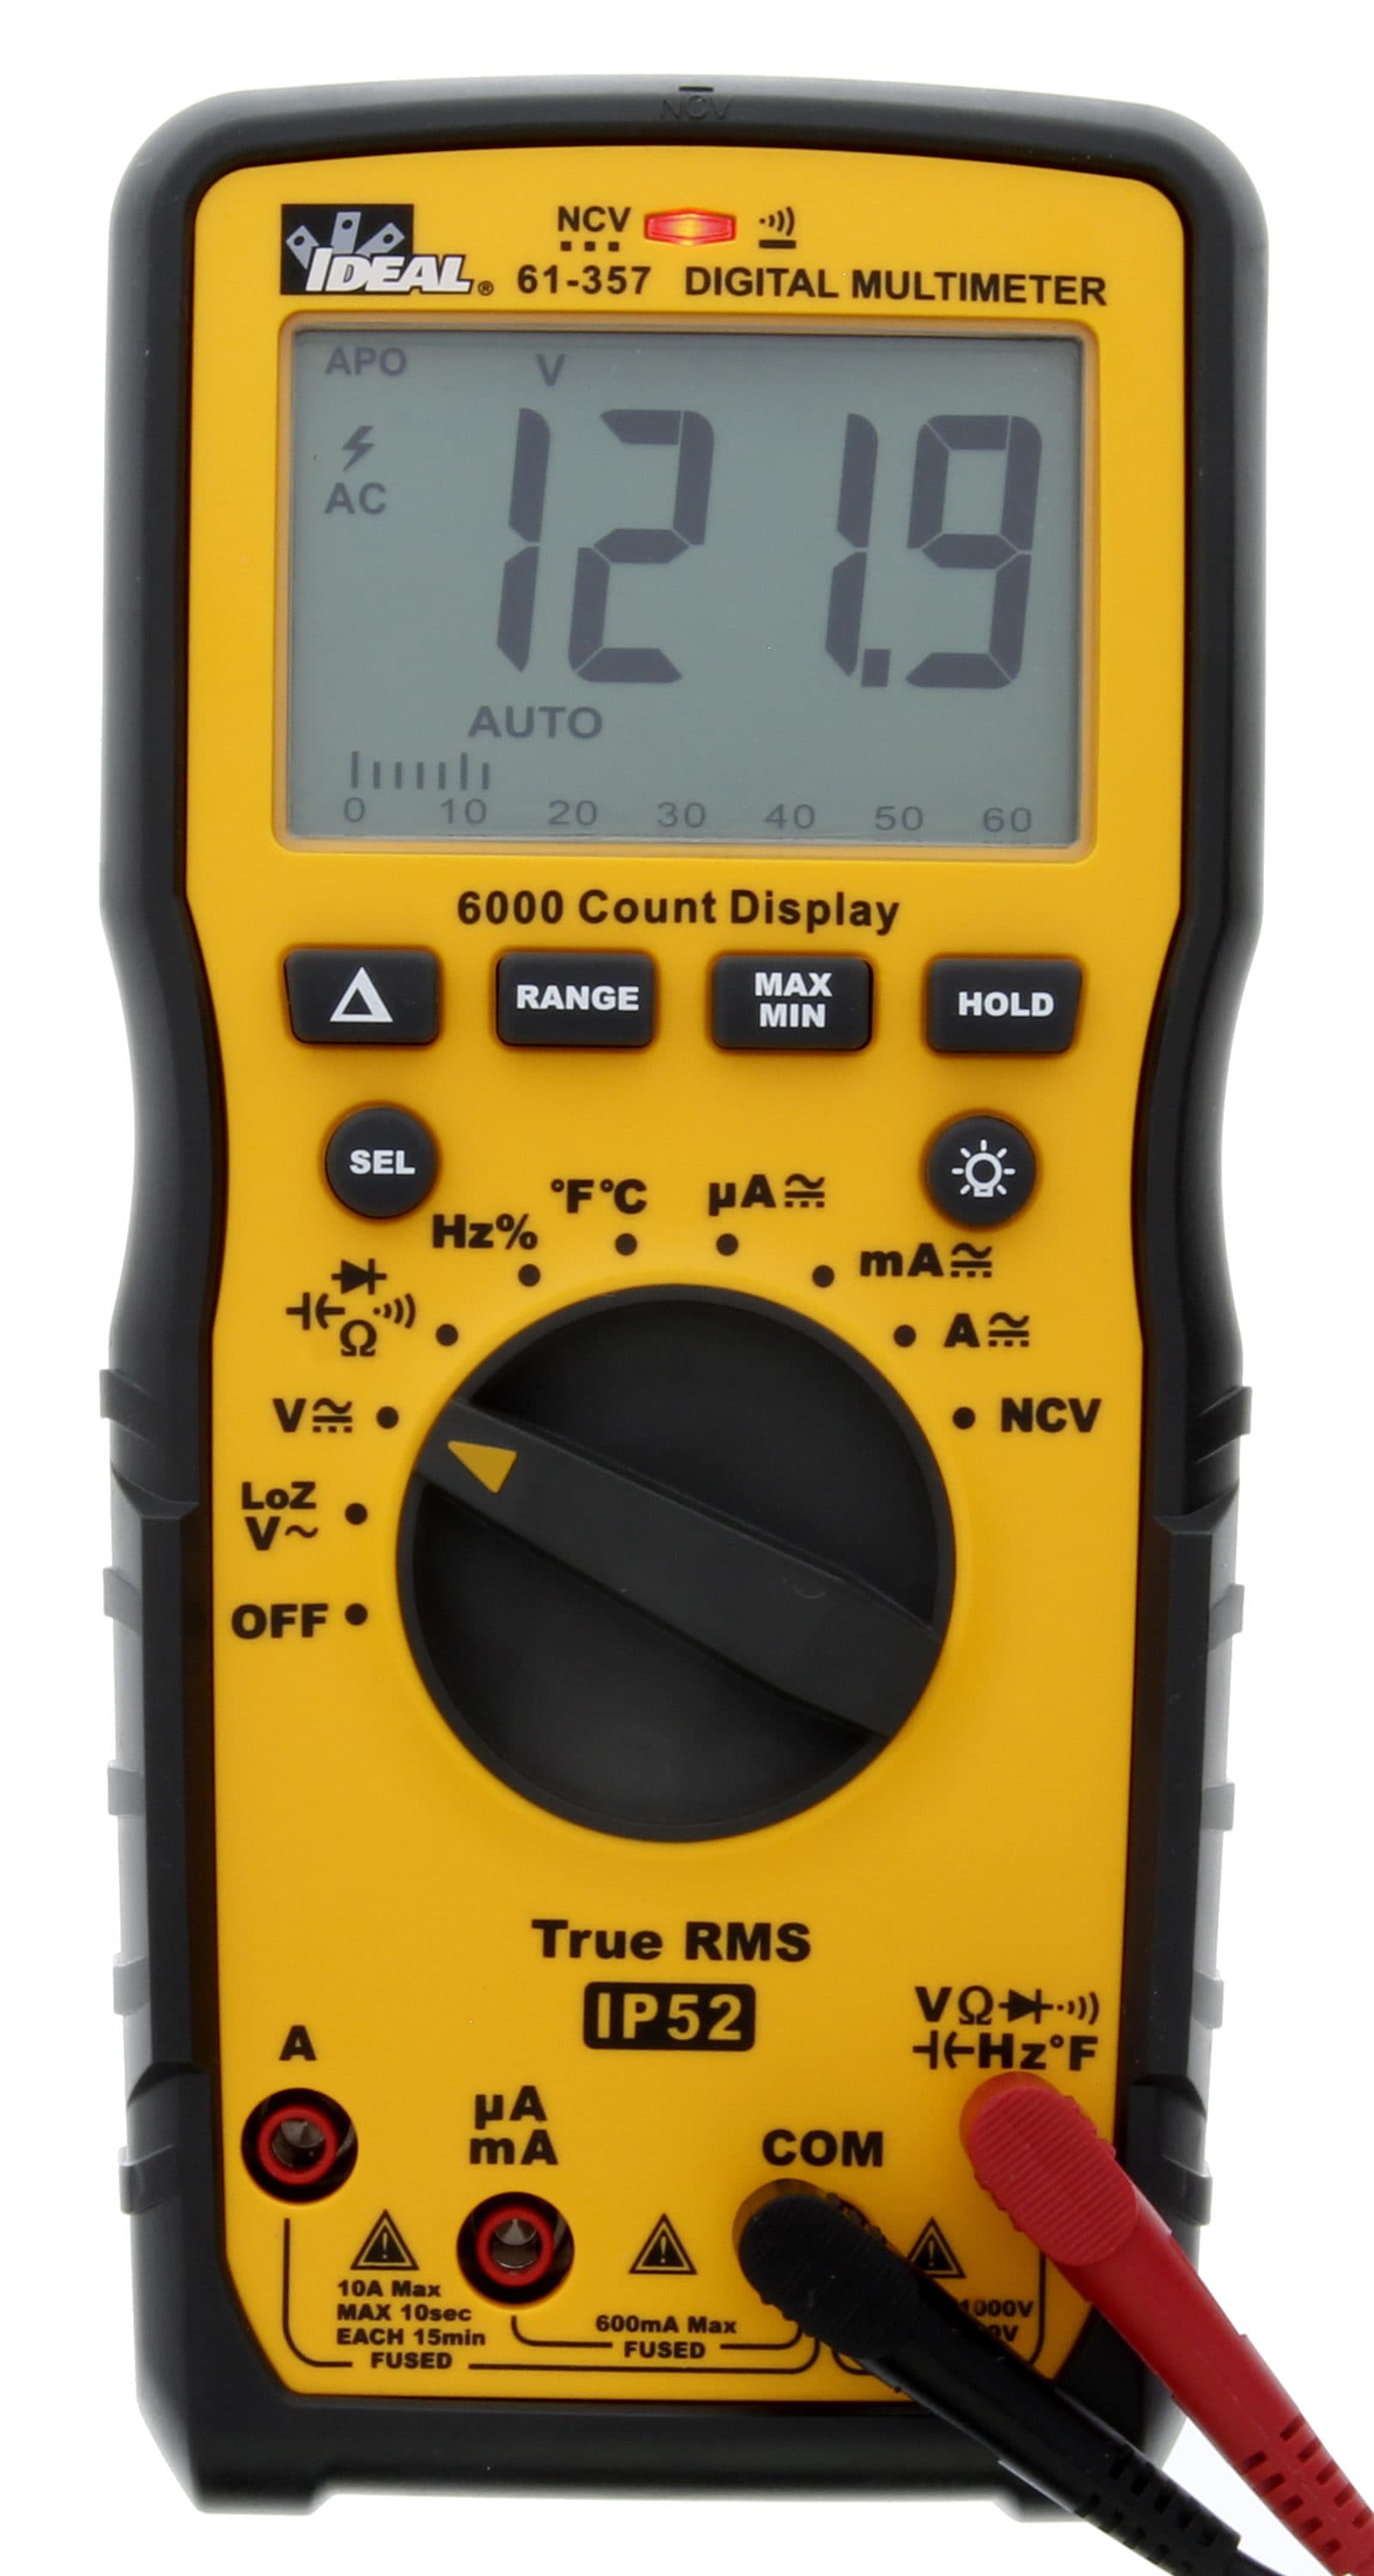 IDEAL Non-contact Lcd Multimeter 10 Amp 1000-Volt in the